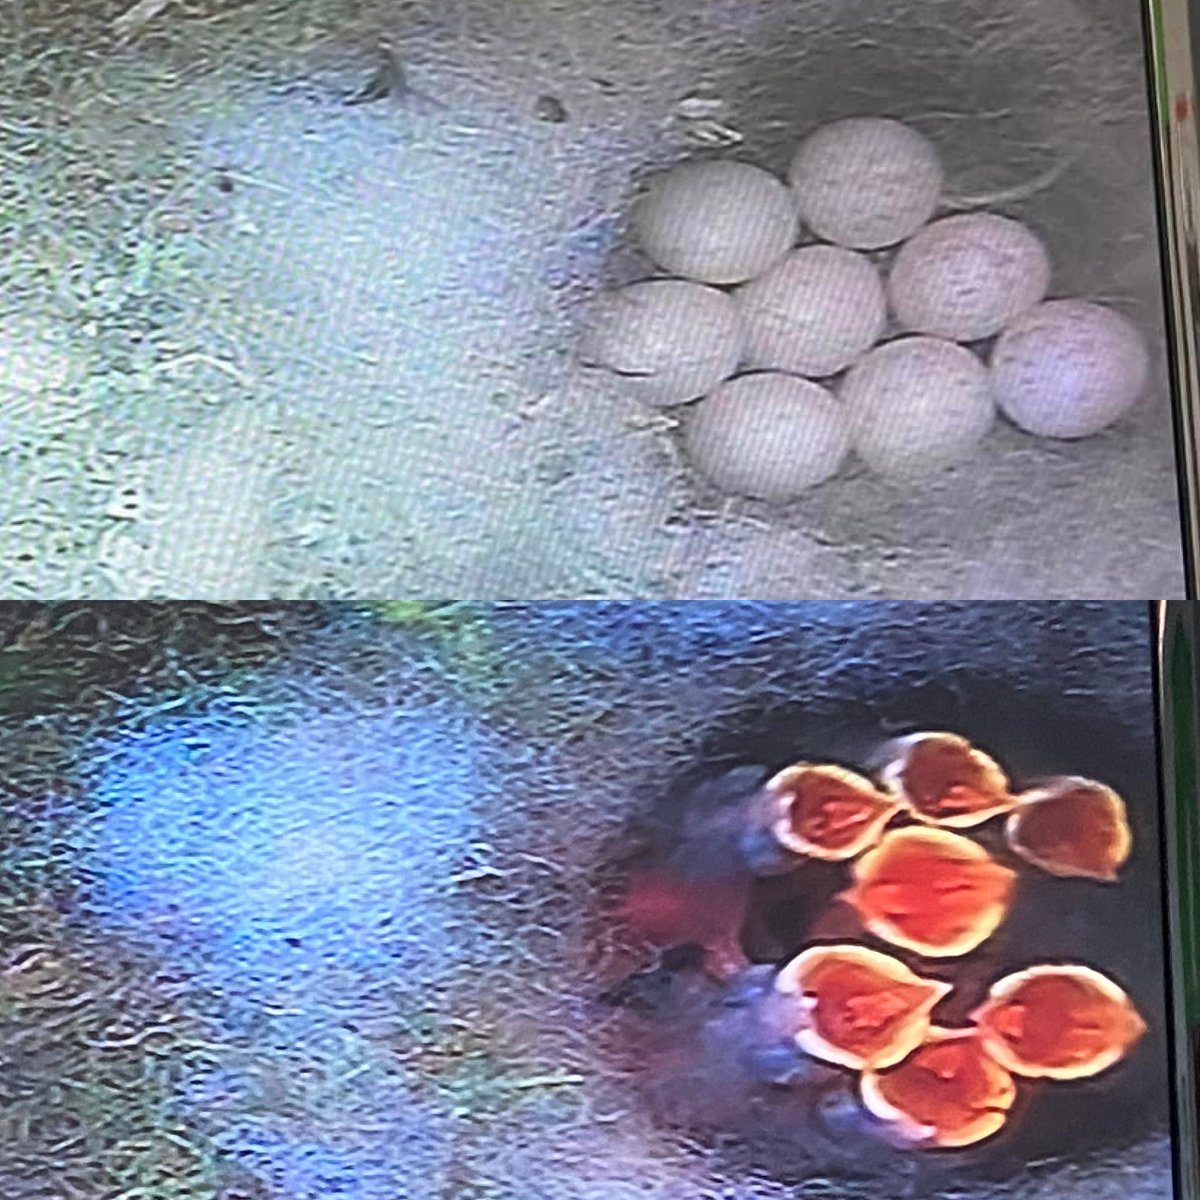 How it started vs how it’s going. 8 eggs become 7 hungry mouths in one week. Keep safe over the bank holiday weekend little ones! @Natures_Voice